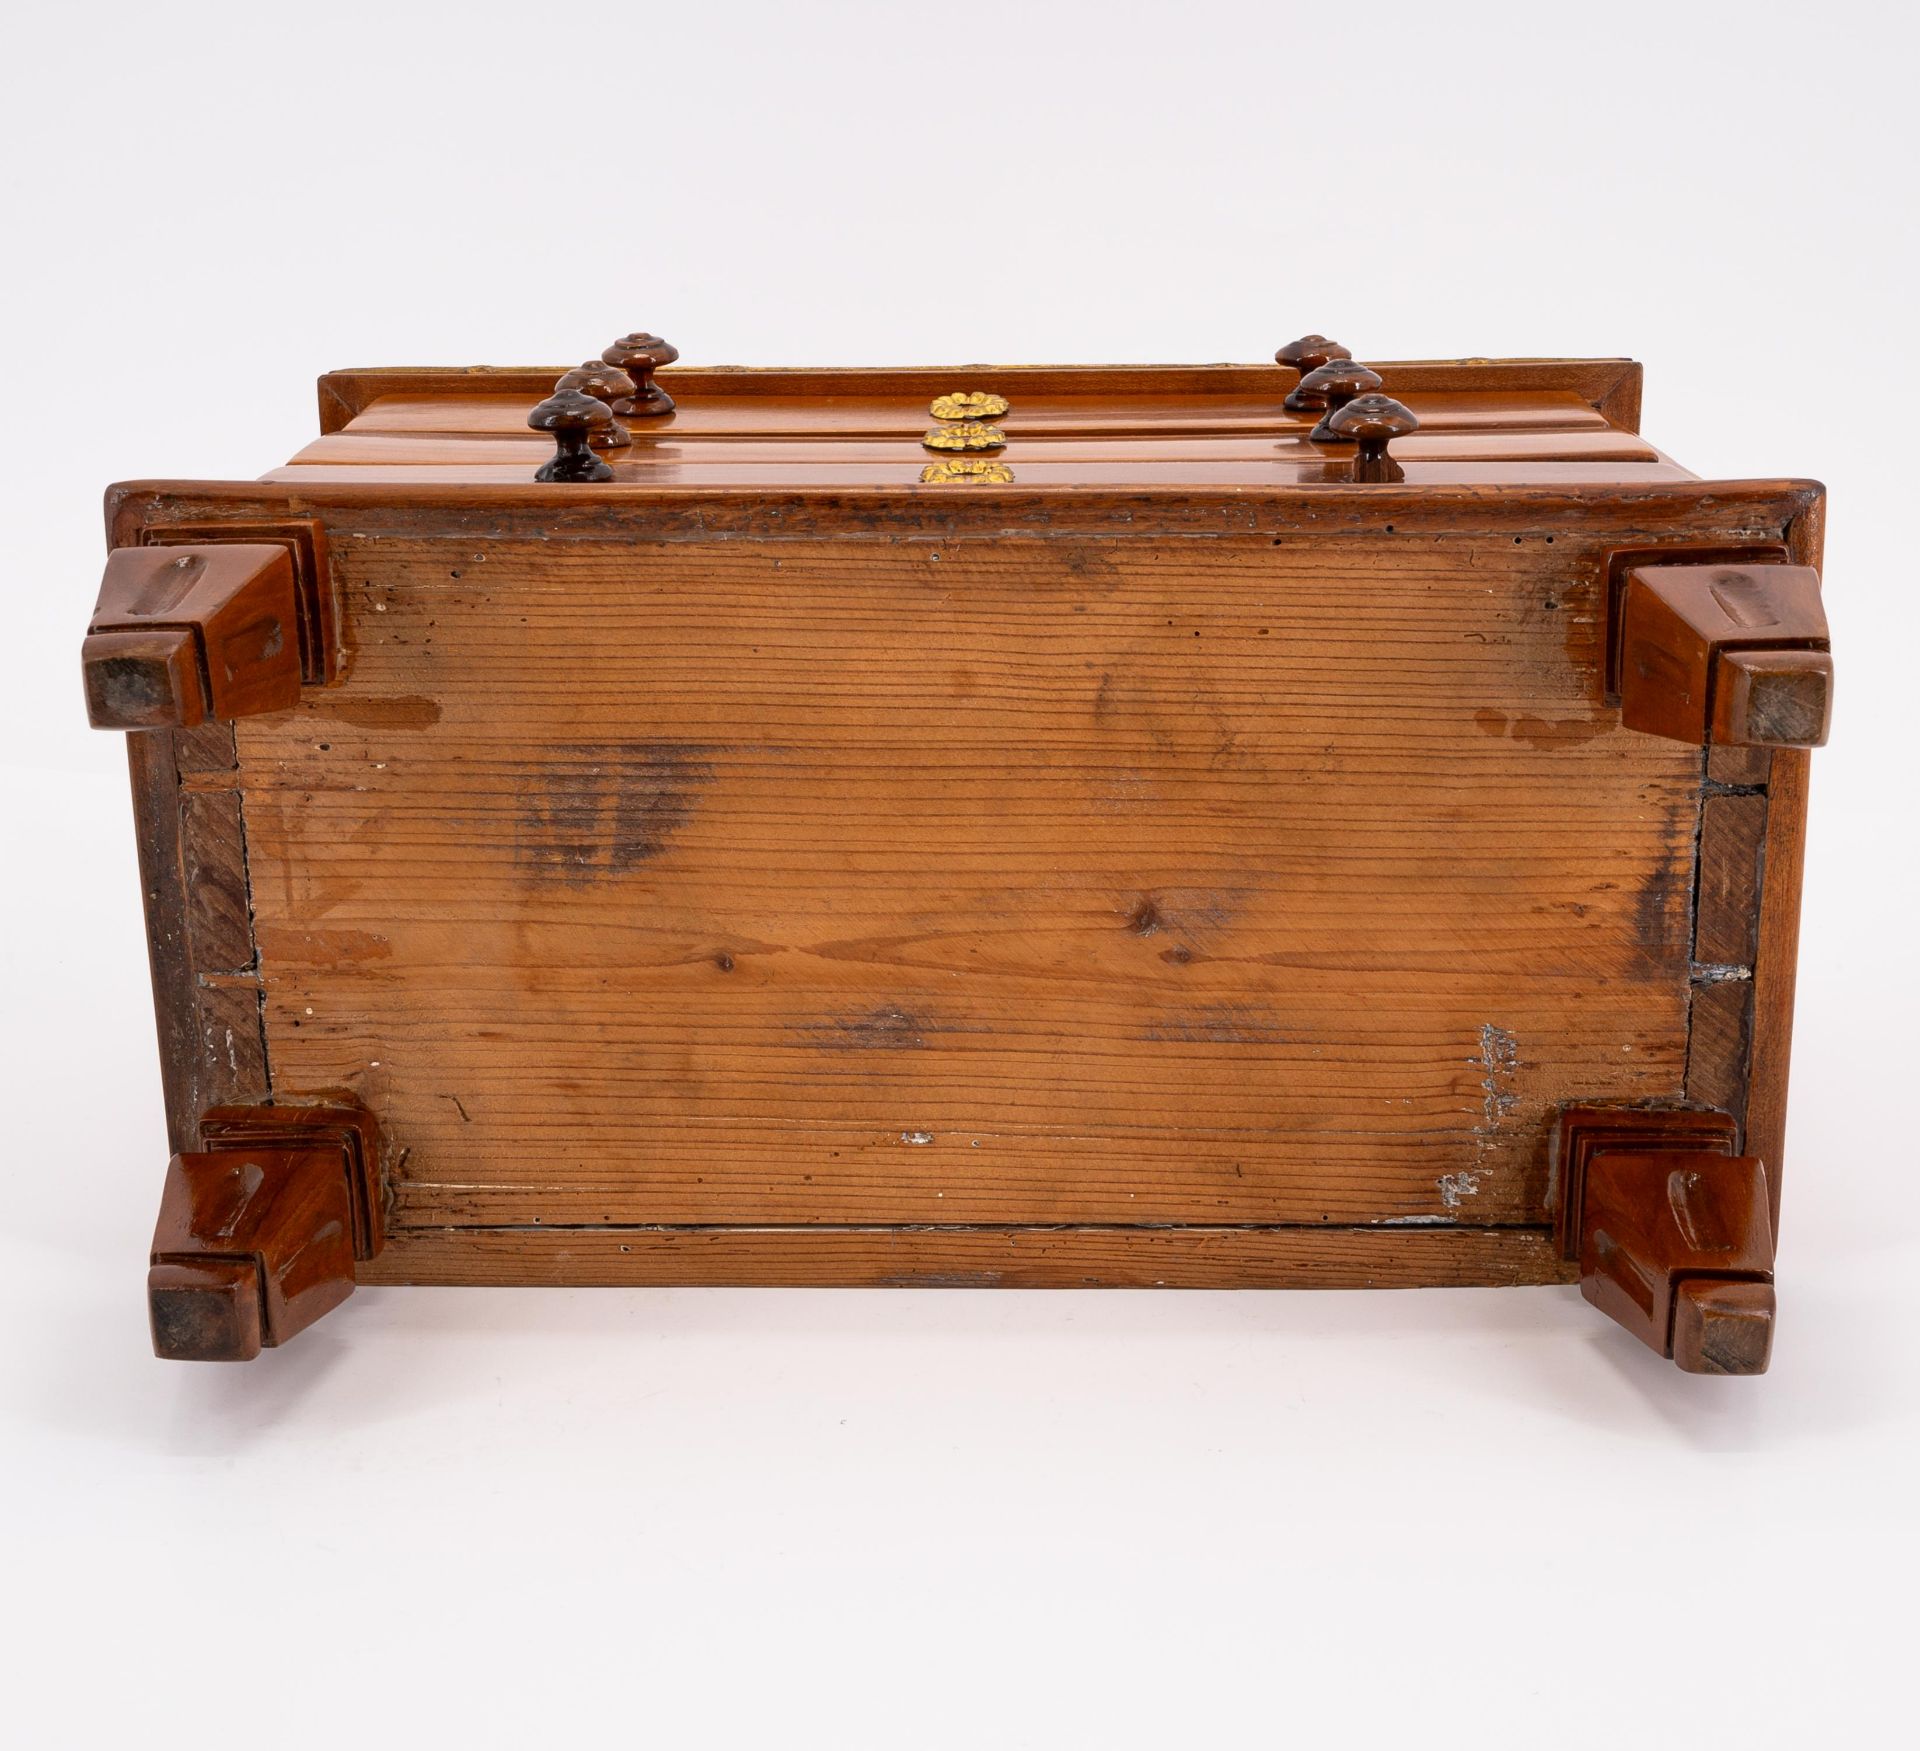 Germany: MINIATURE WOODEN BIEDERMEIER CHEST OF DRAWERS - Image 7 of 7